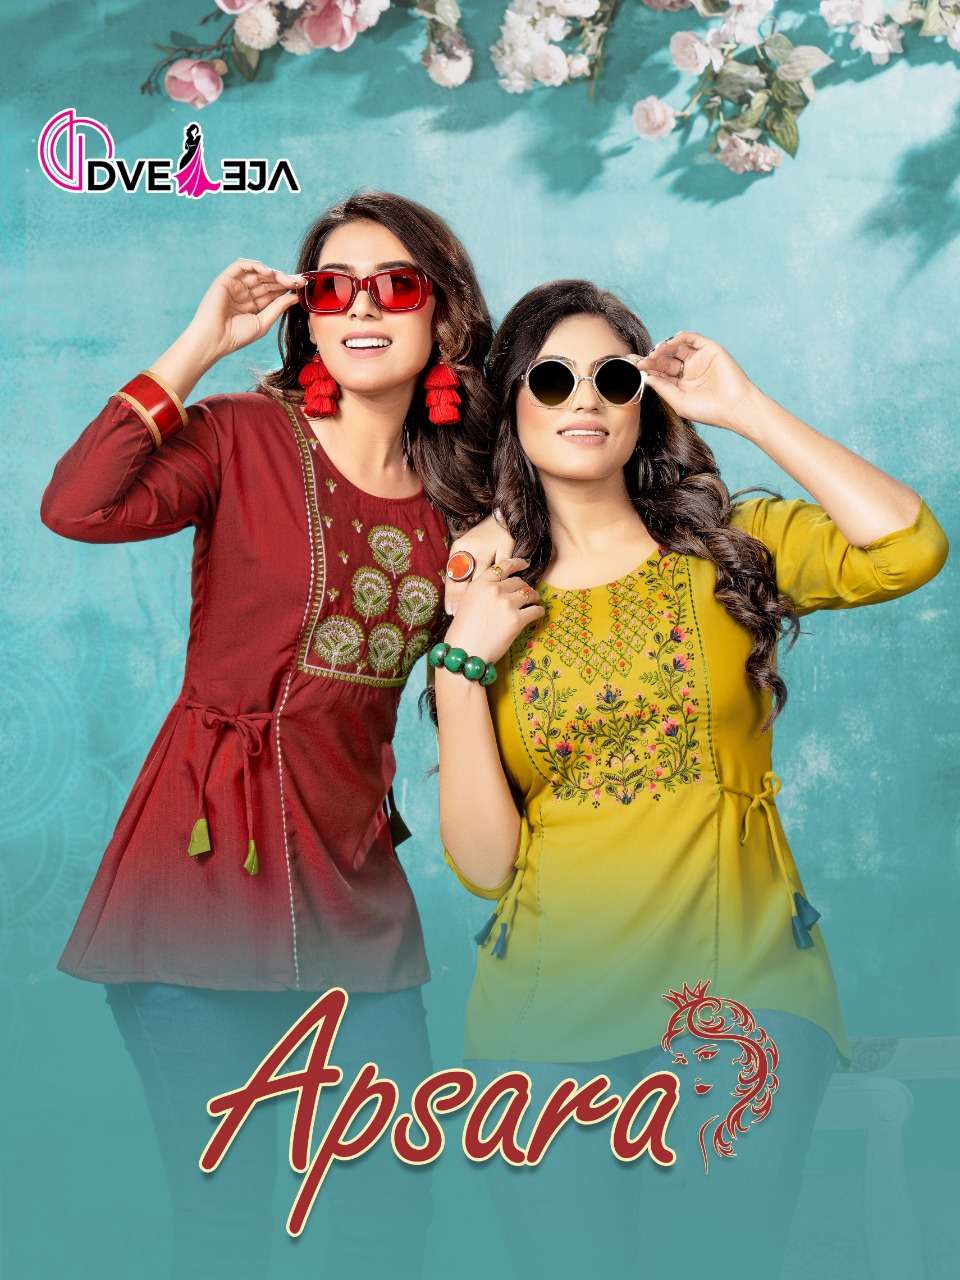 APSARA VOL 1 BY DVEEJA BRAND FANCY RAYON DOBBY WITH EMBROIDERY WORK AND SIDE DORI PATTERN SHORT TOP ...